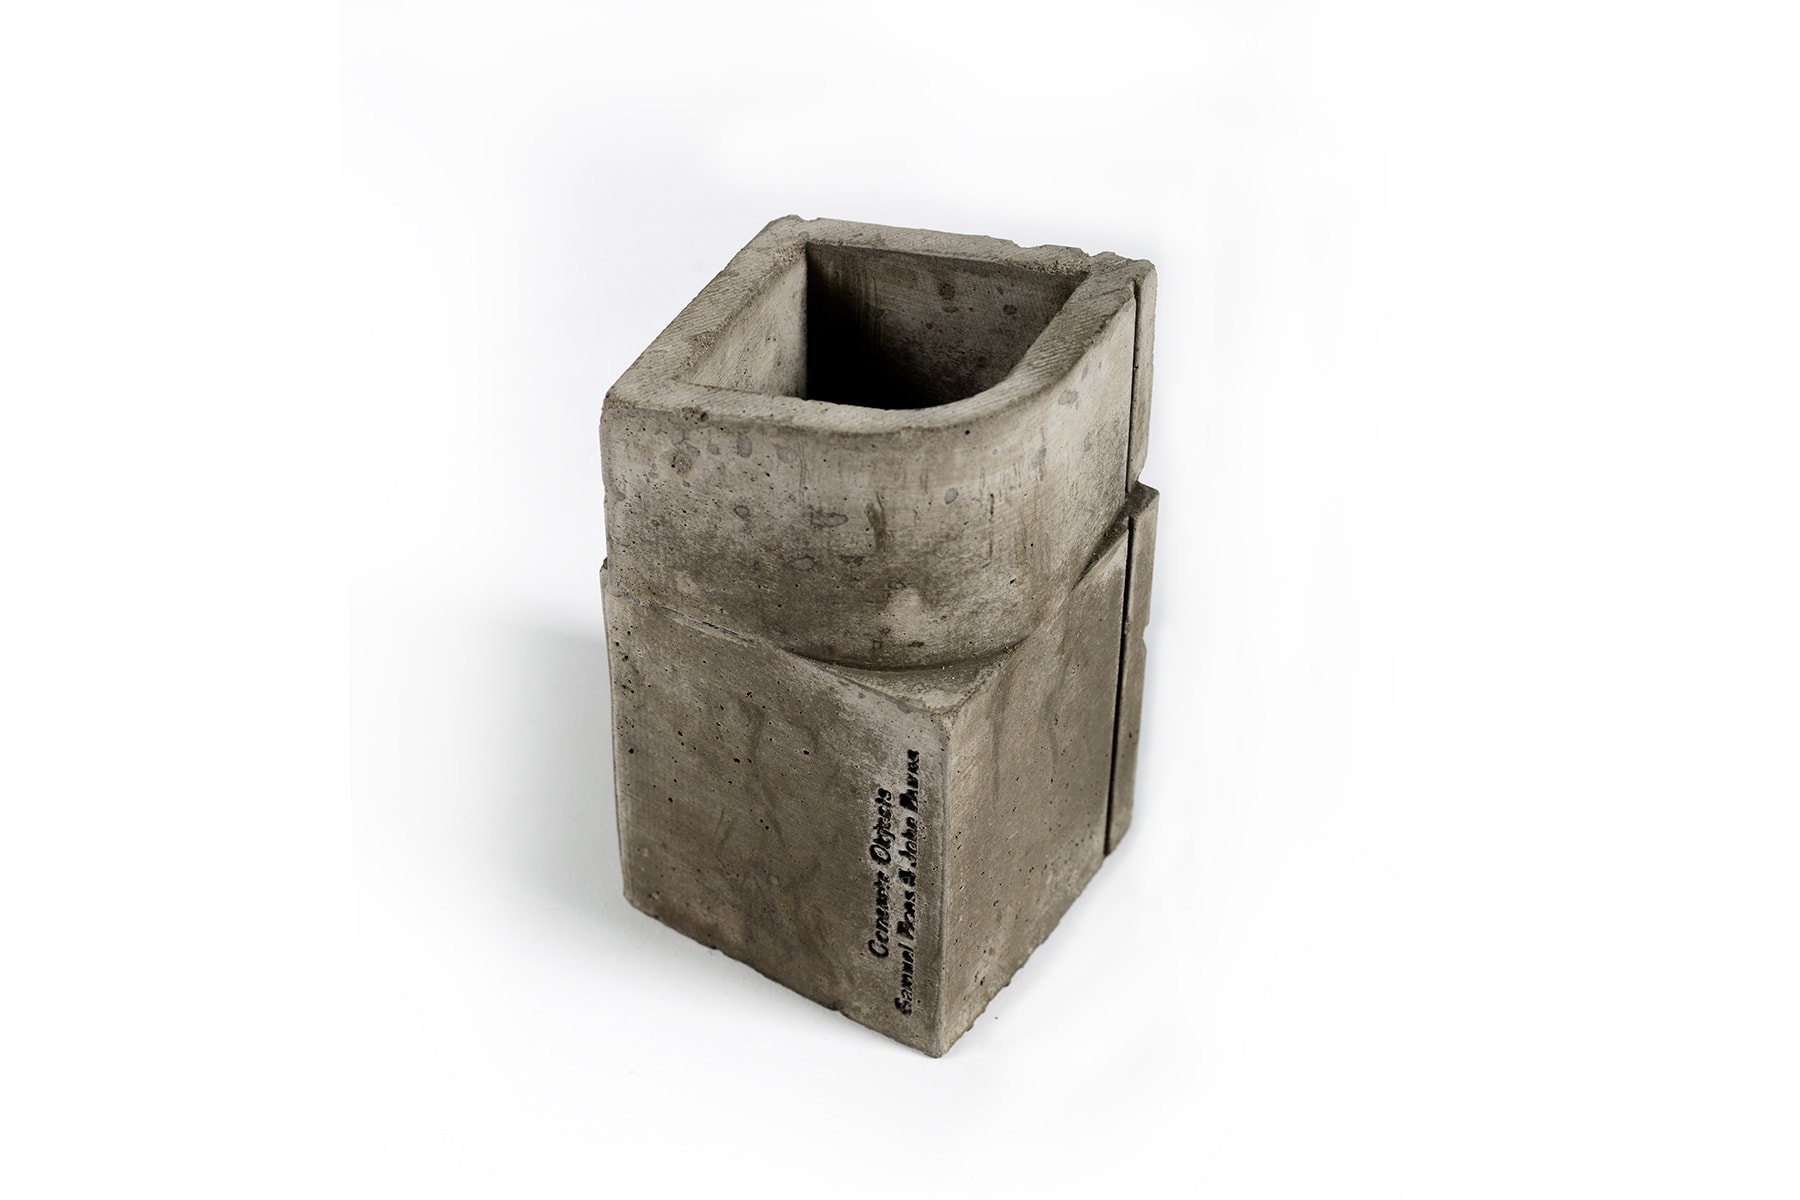 A-COLD-WALL* Samuel Ross Jobe Burns Concrete Objects Incense Cement Cup Holder